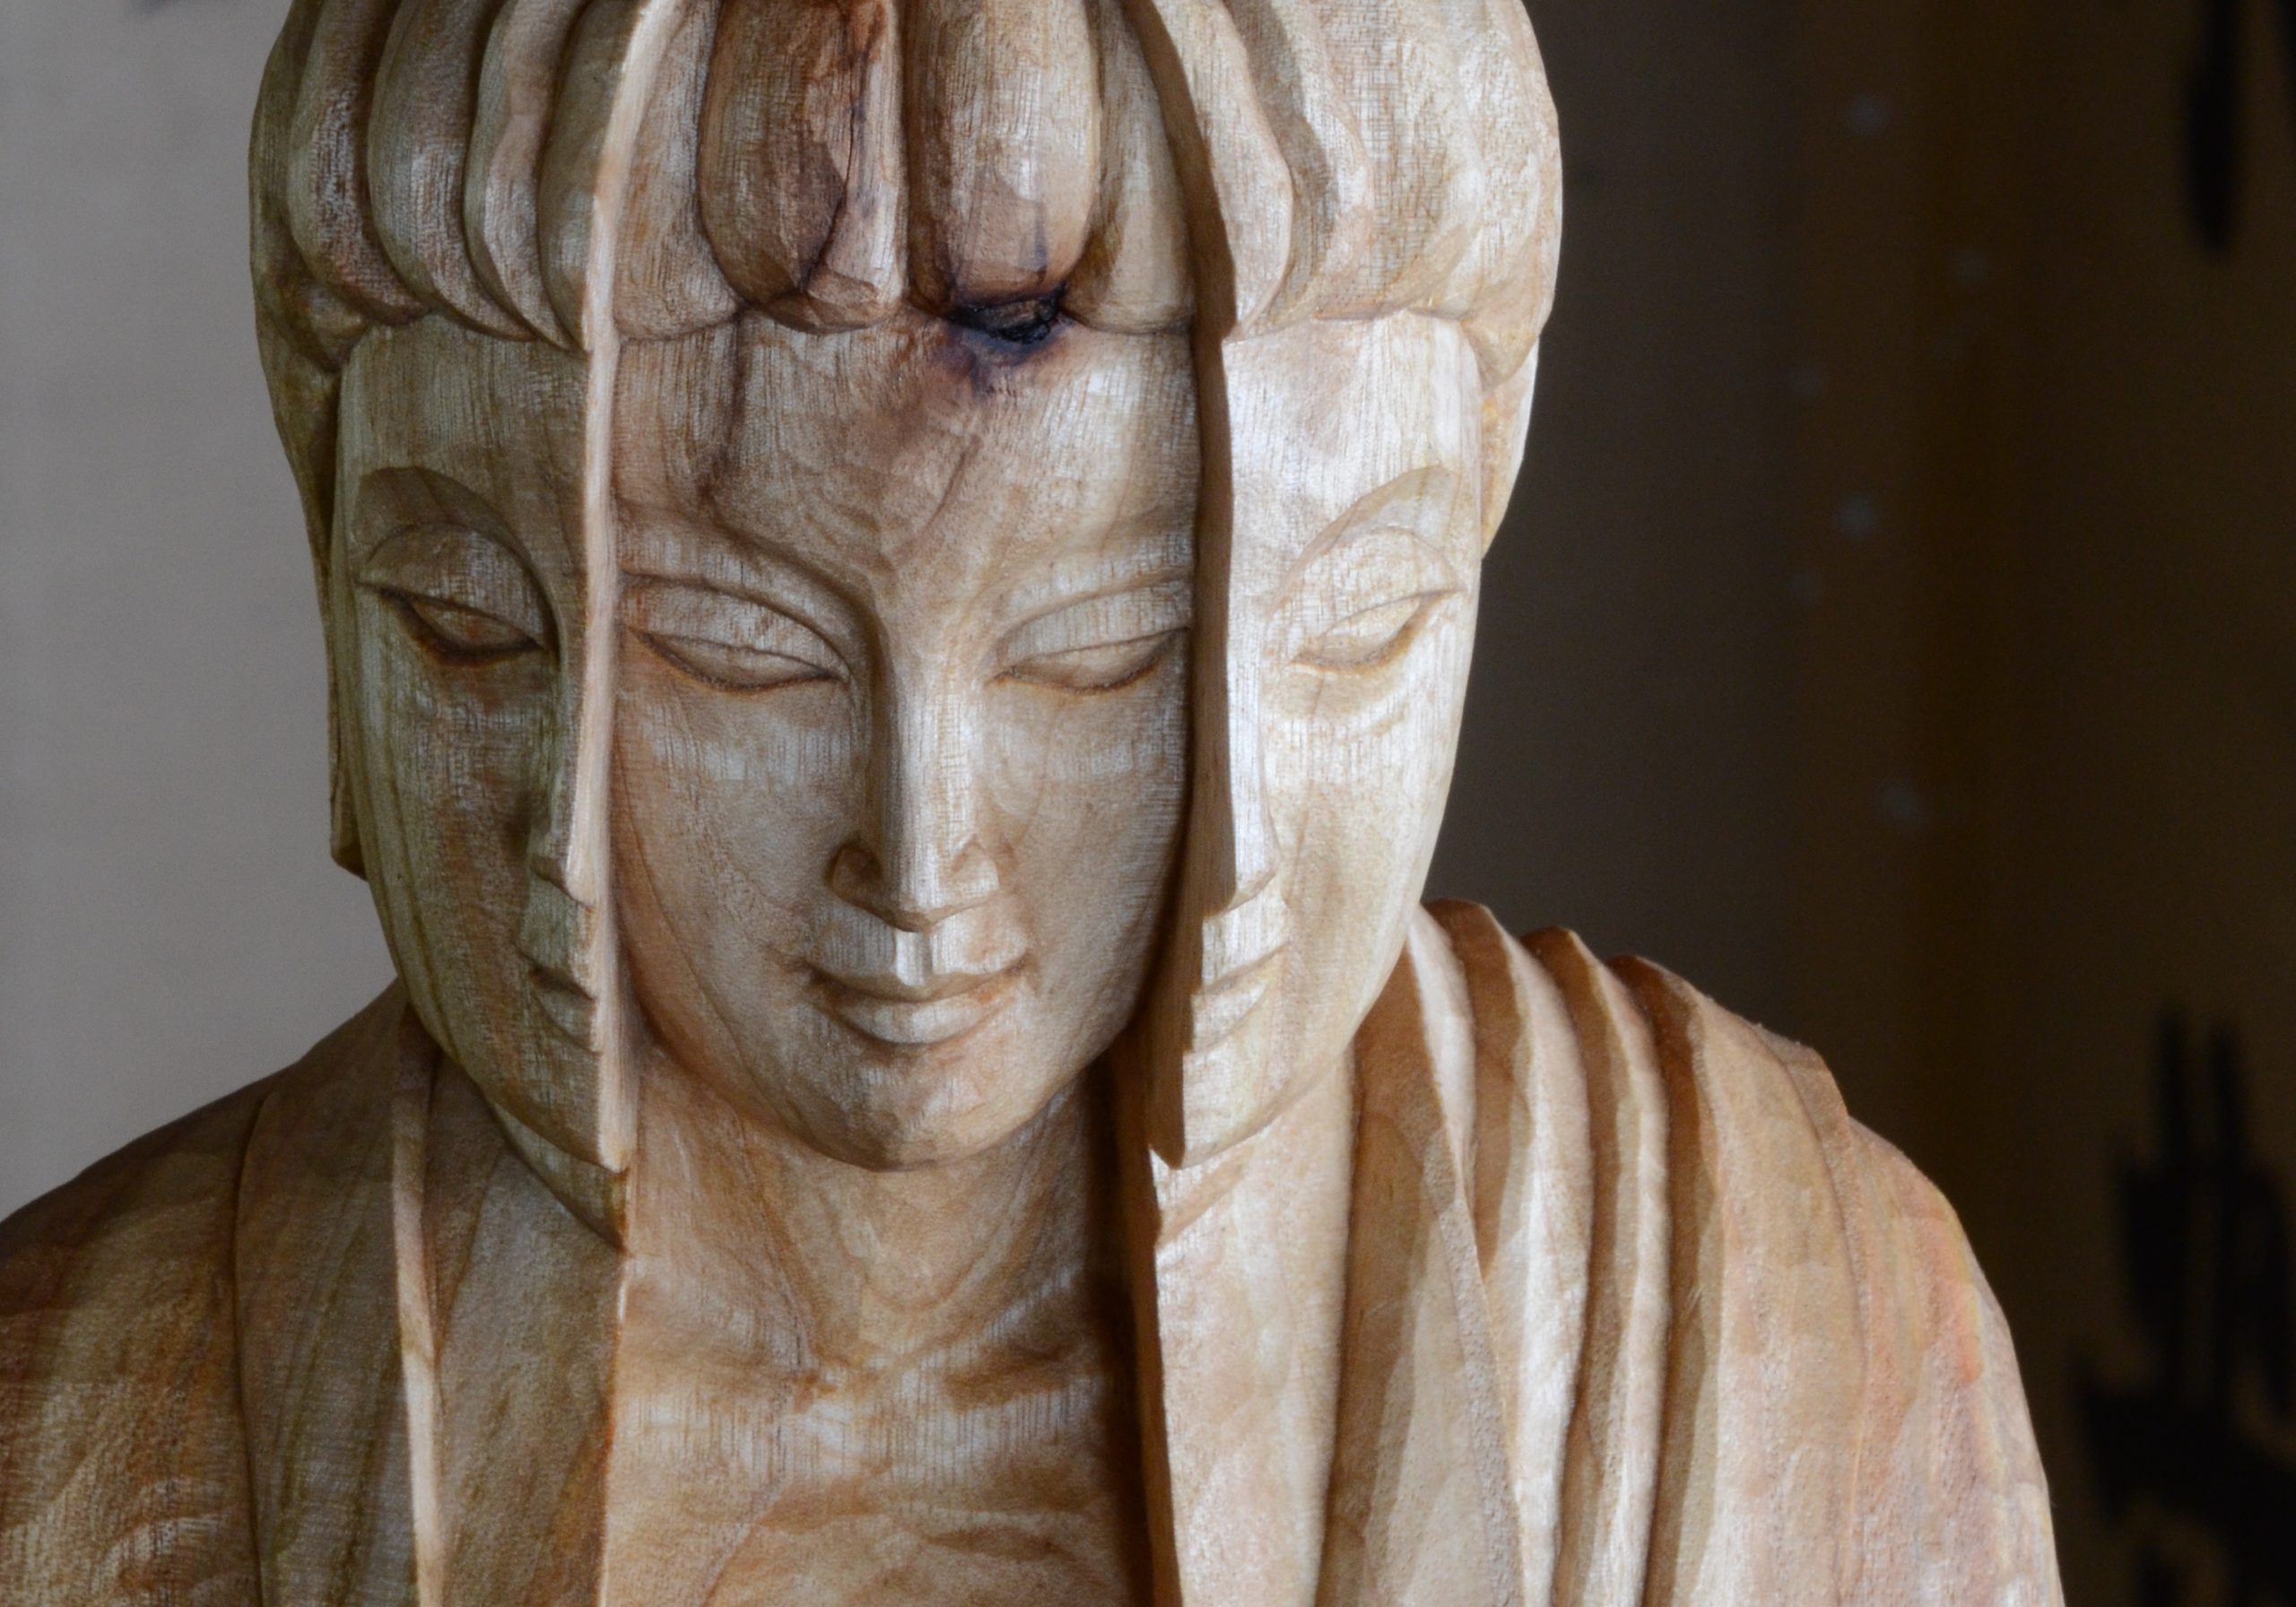 Carving the Buddha: An interview with Artisan Takuo Hasegawa